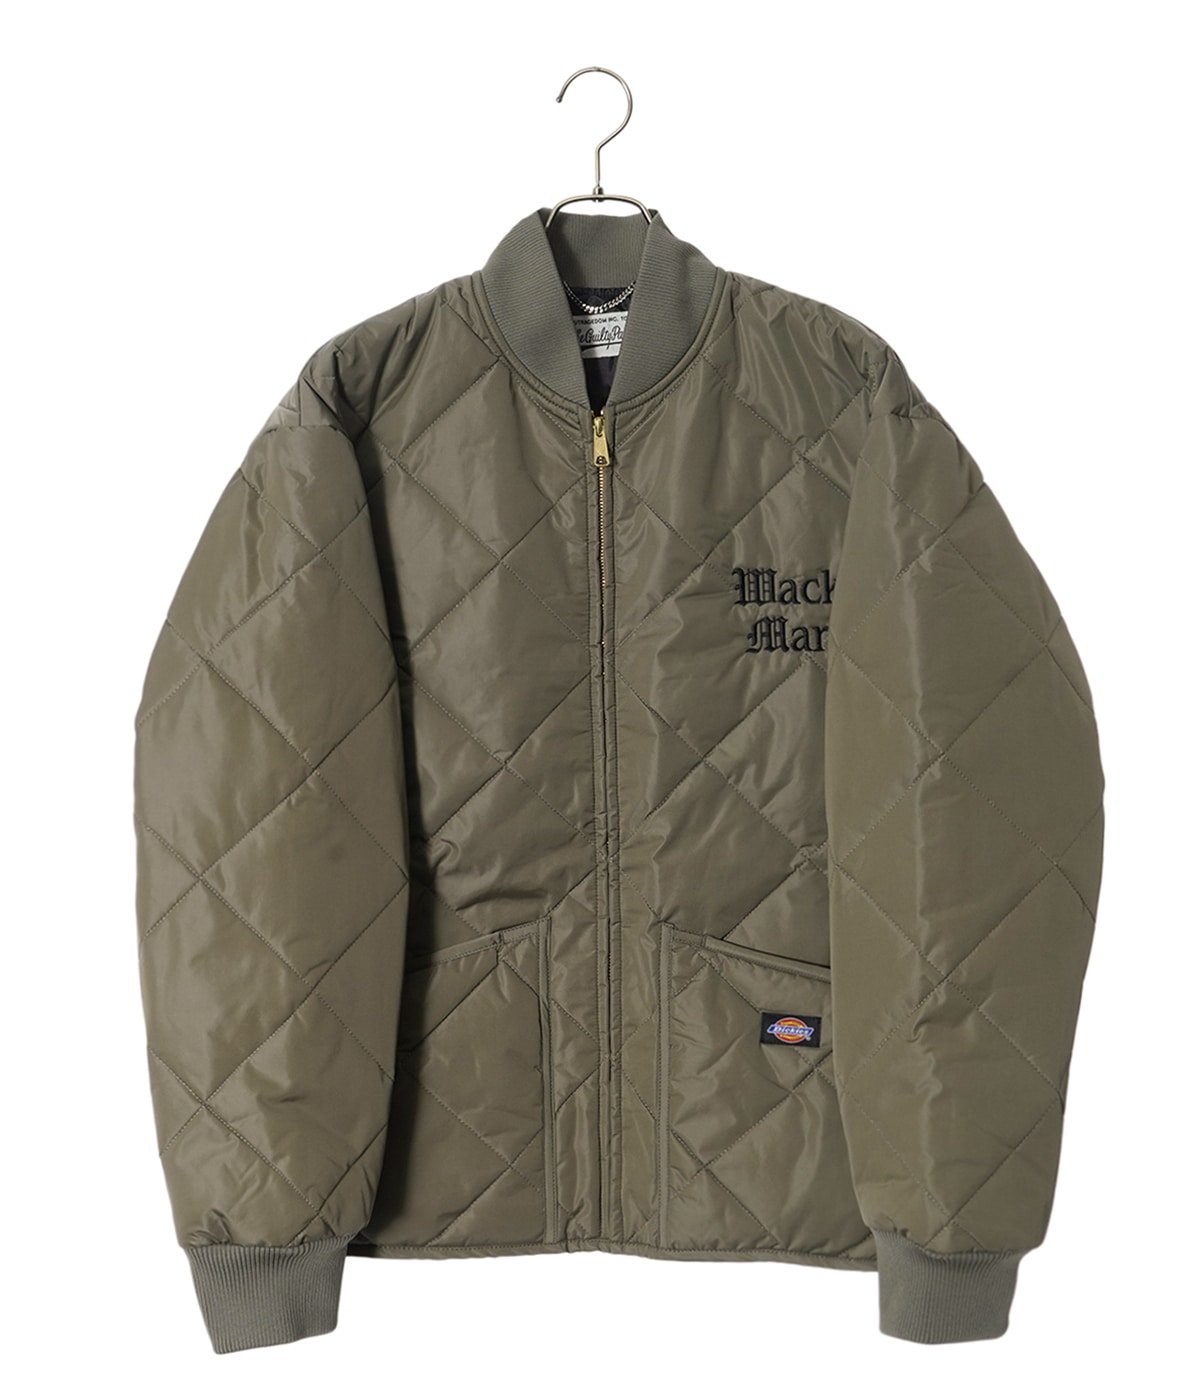 DICKIES / QUILTED JACKET